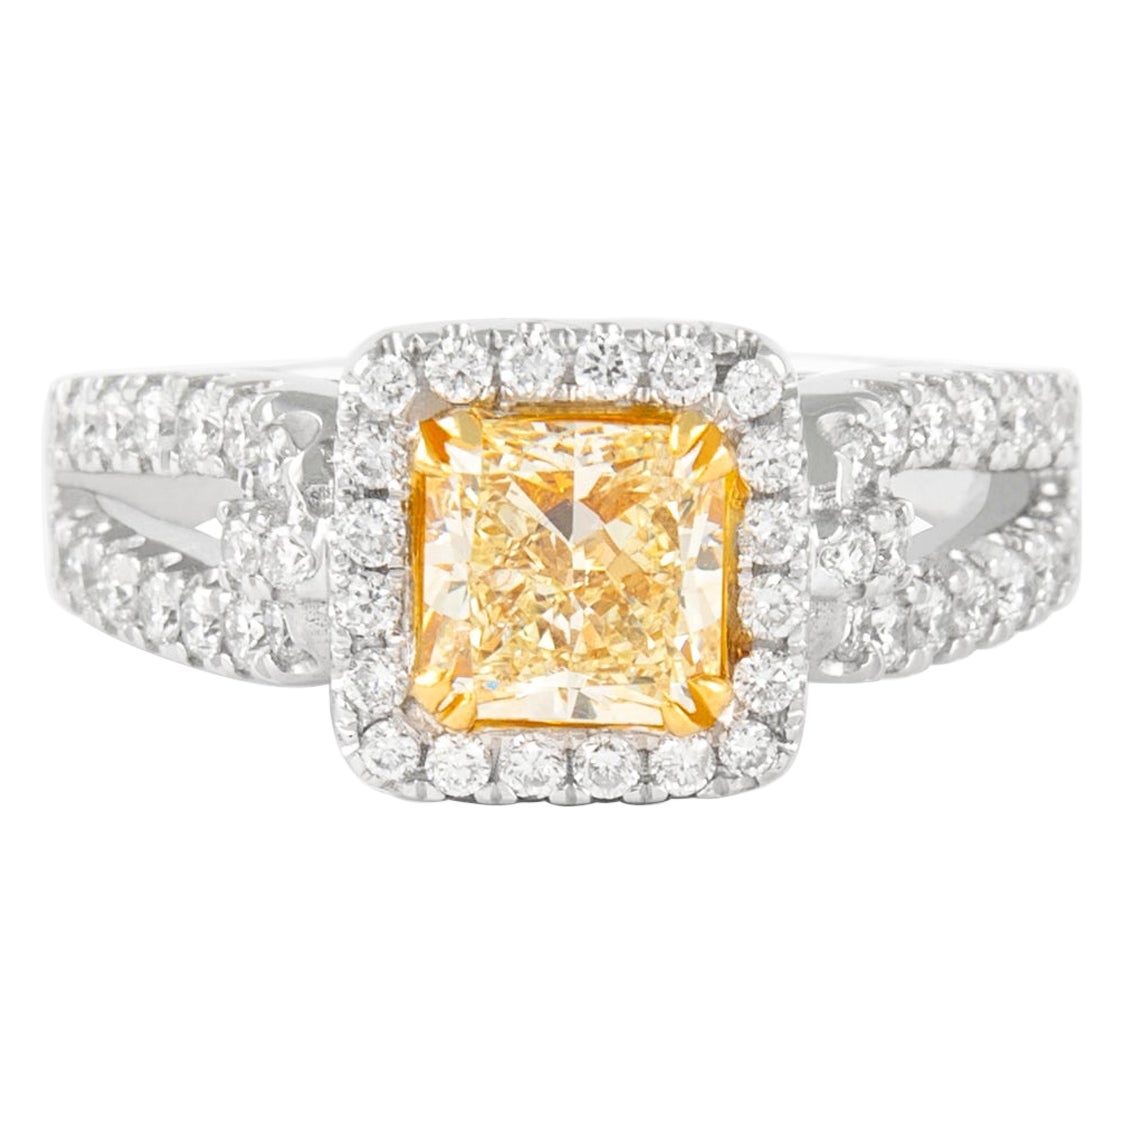 Alexander 1.19ct Fancy Intense Yellow Radiant Diamond with Halo Ring 18k